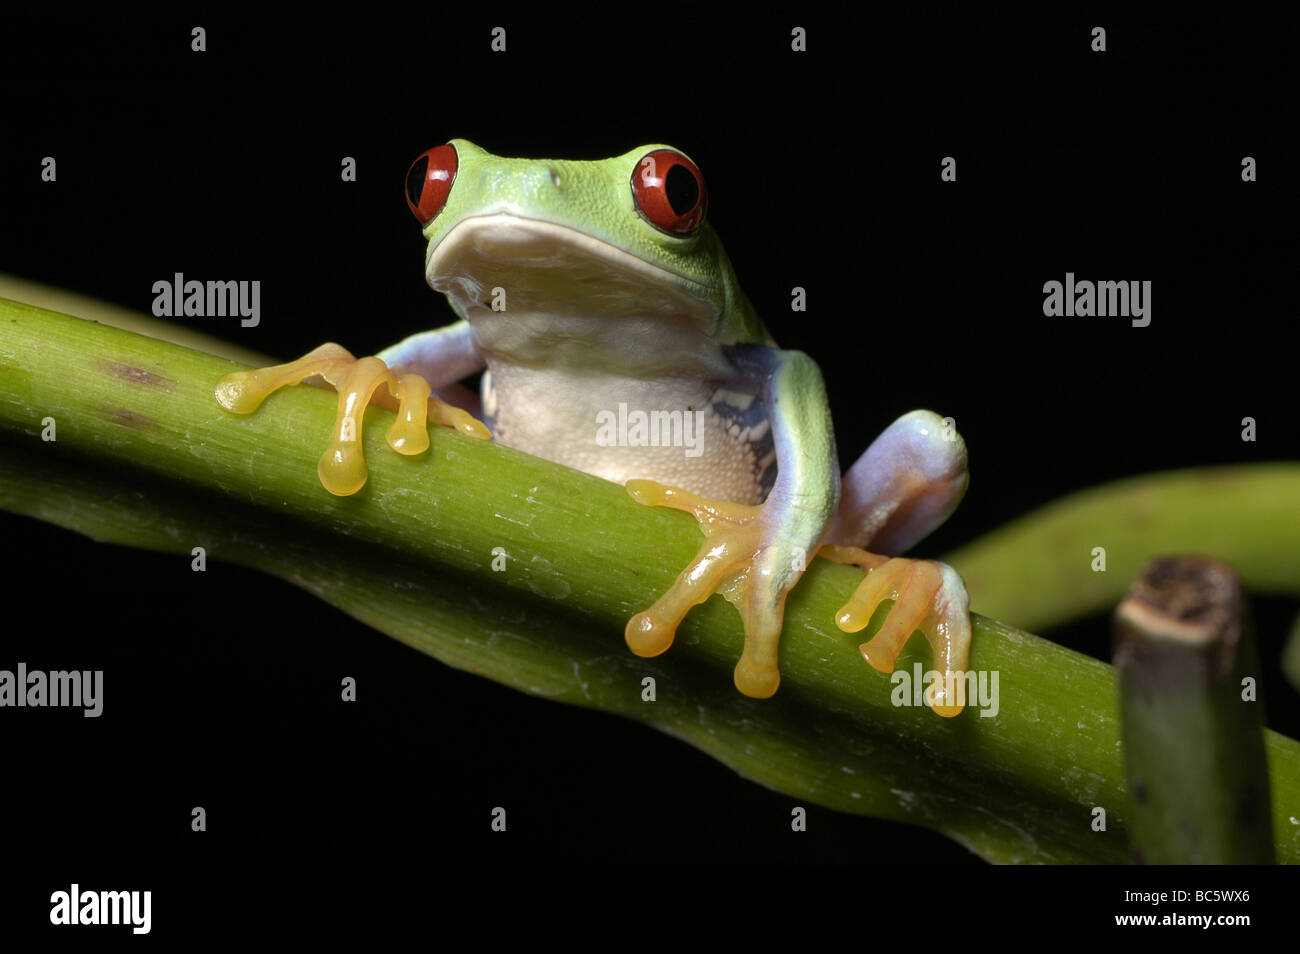 Young Red Eyed Tree Frog, Agalychnis callidry, climbing on a branch. Also known as Red Eyed Leaf Frog. Stock Photo